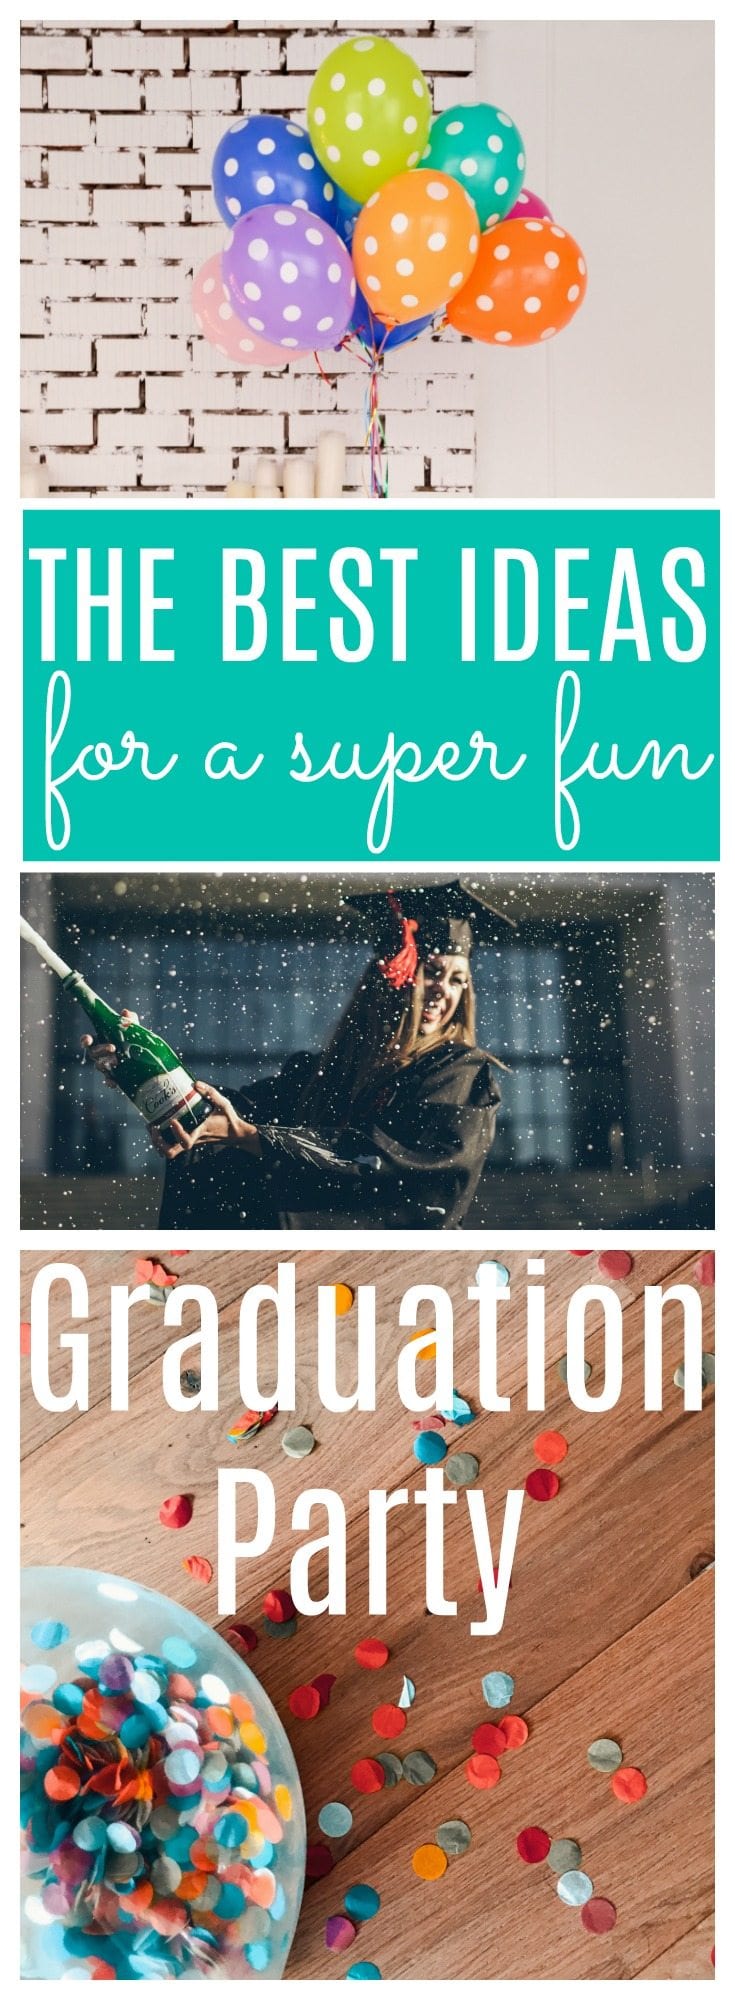 Graduation Party Ideas: How to Celebrate Your Senior's Big Day